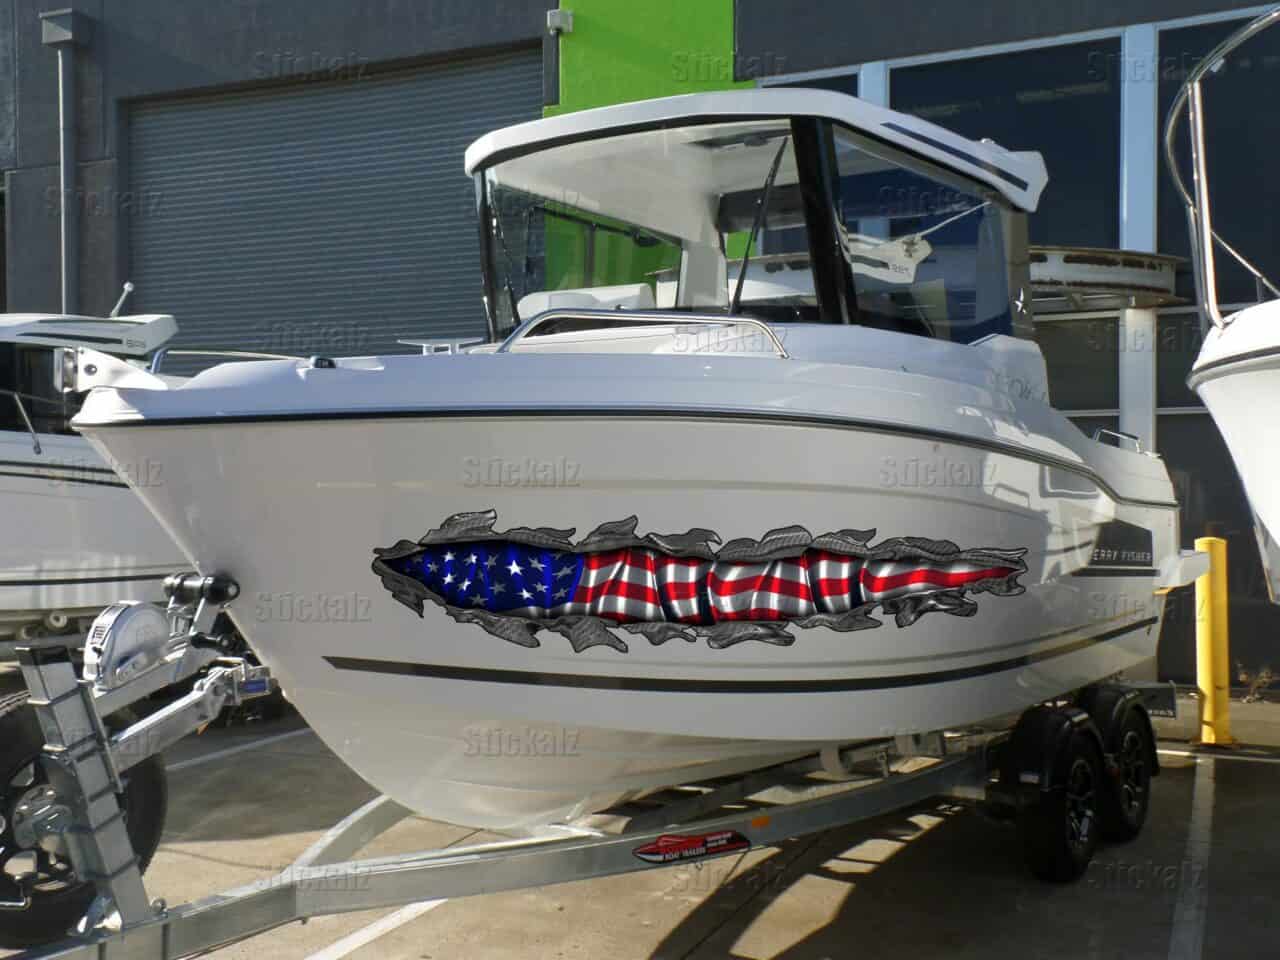 Boat Decal Graphics: Enhance Your Boat's Appearance with These 10 Unique Designs 1